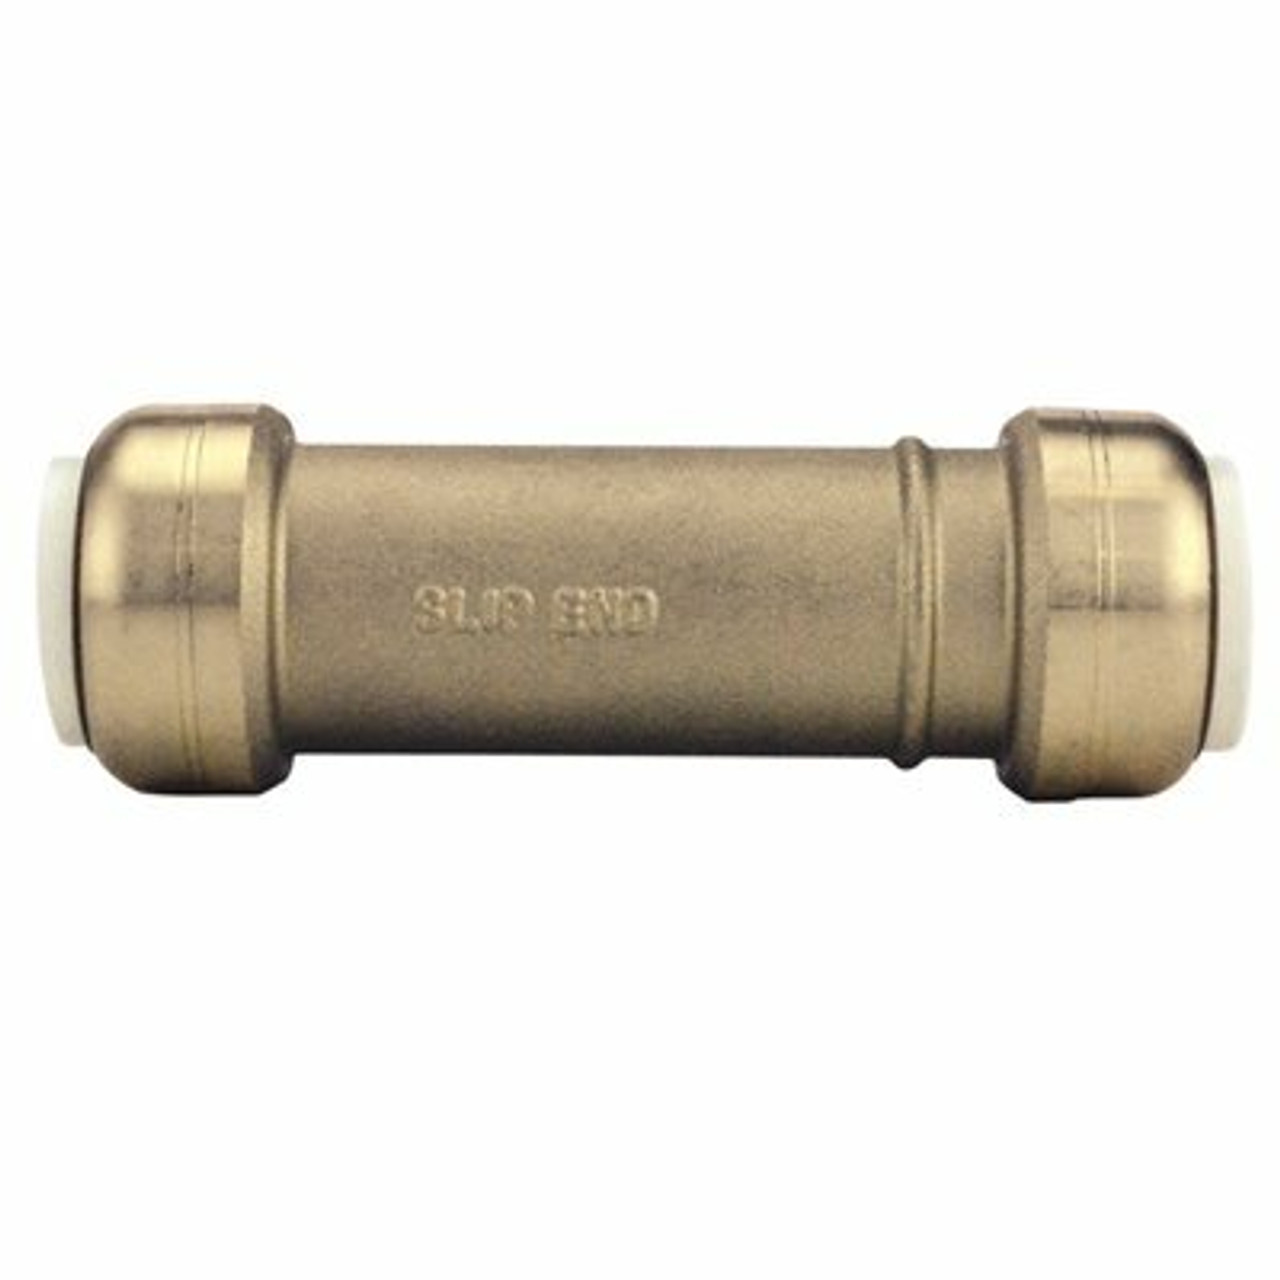 Tectite 3/4 In. Brass Push-To-Connect Pvc Slip Repair Coupling